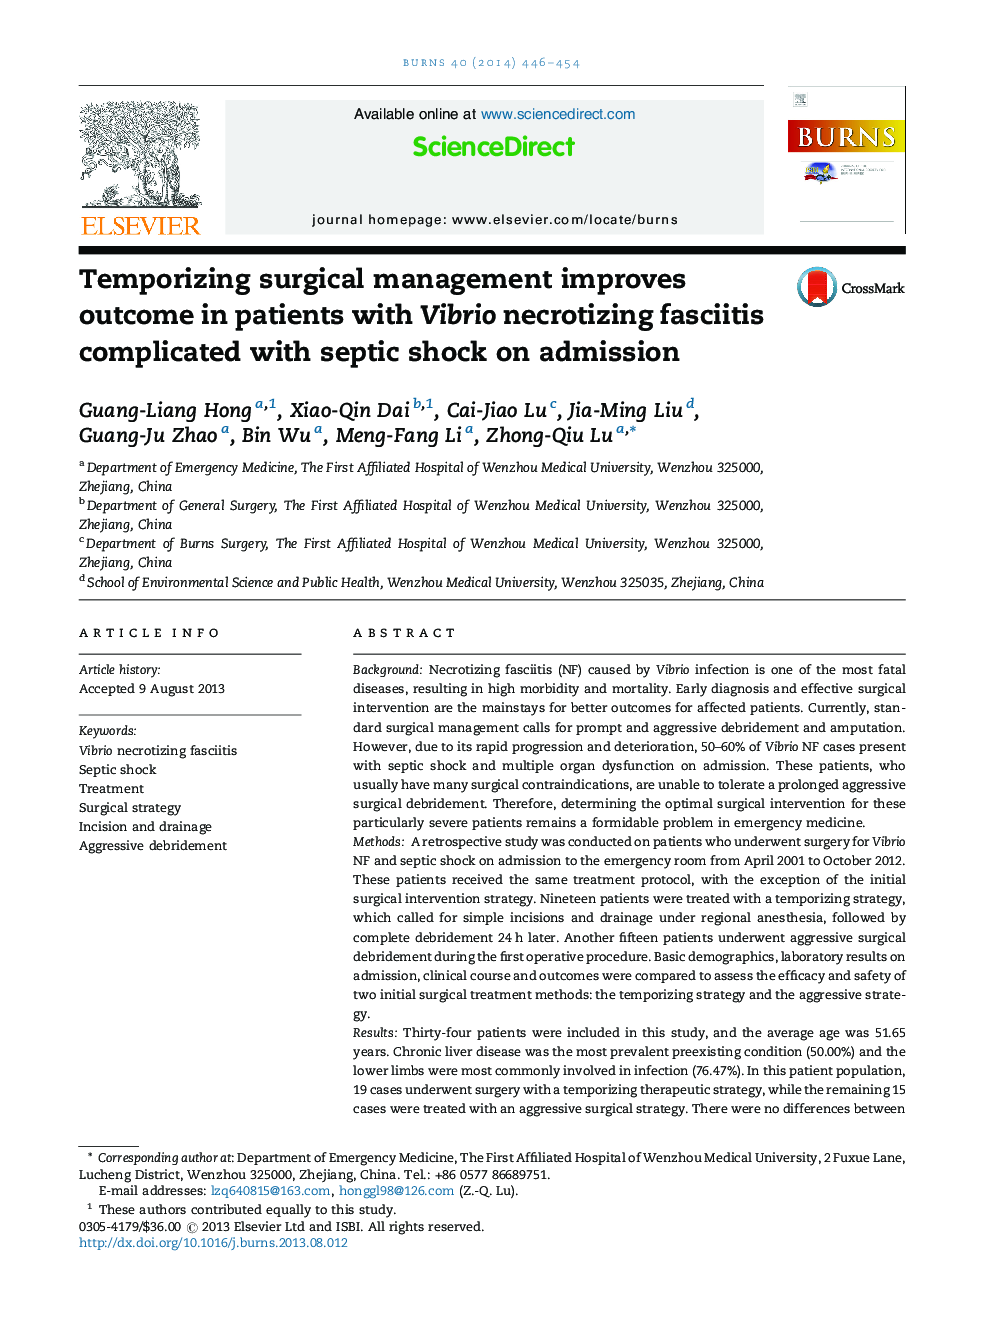 Temporizing surgical management improves outcome in patients with Vibrio necrotizing fasciitis complicated with septic shock on admission